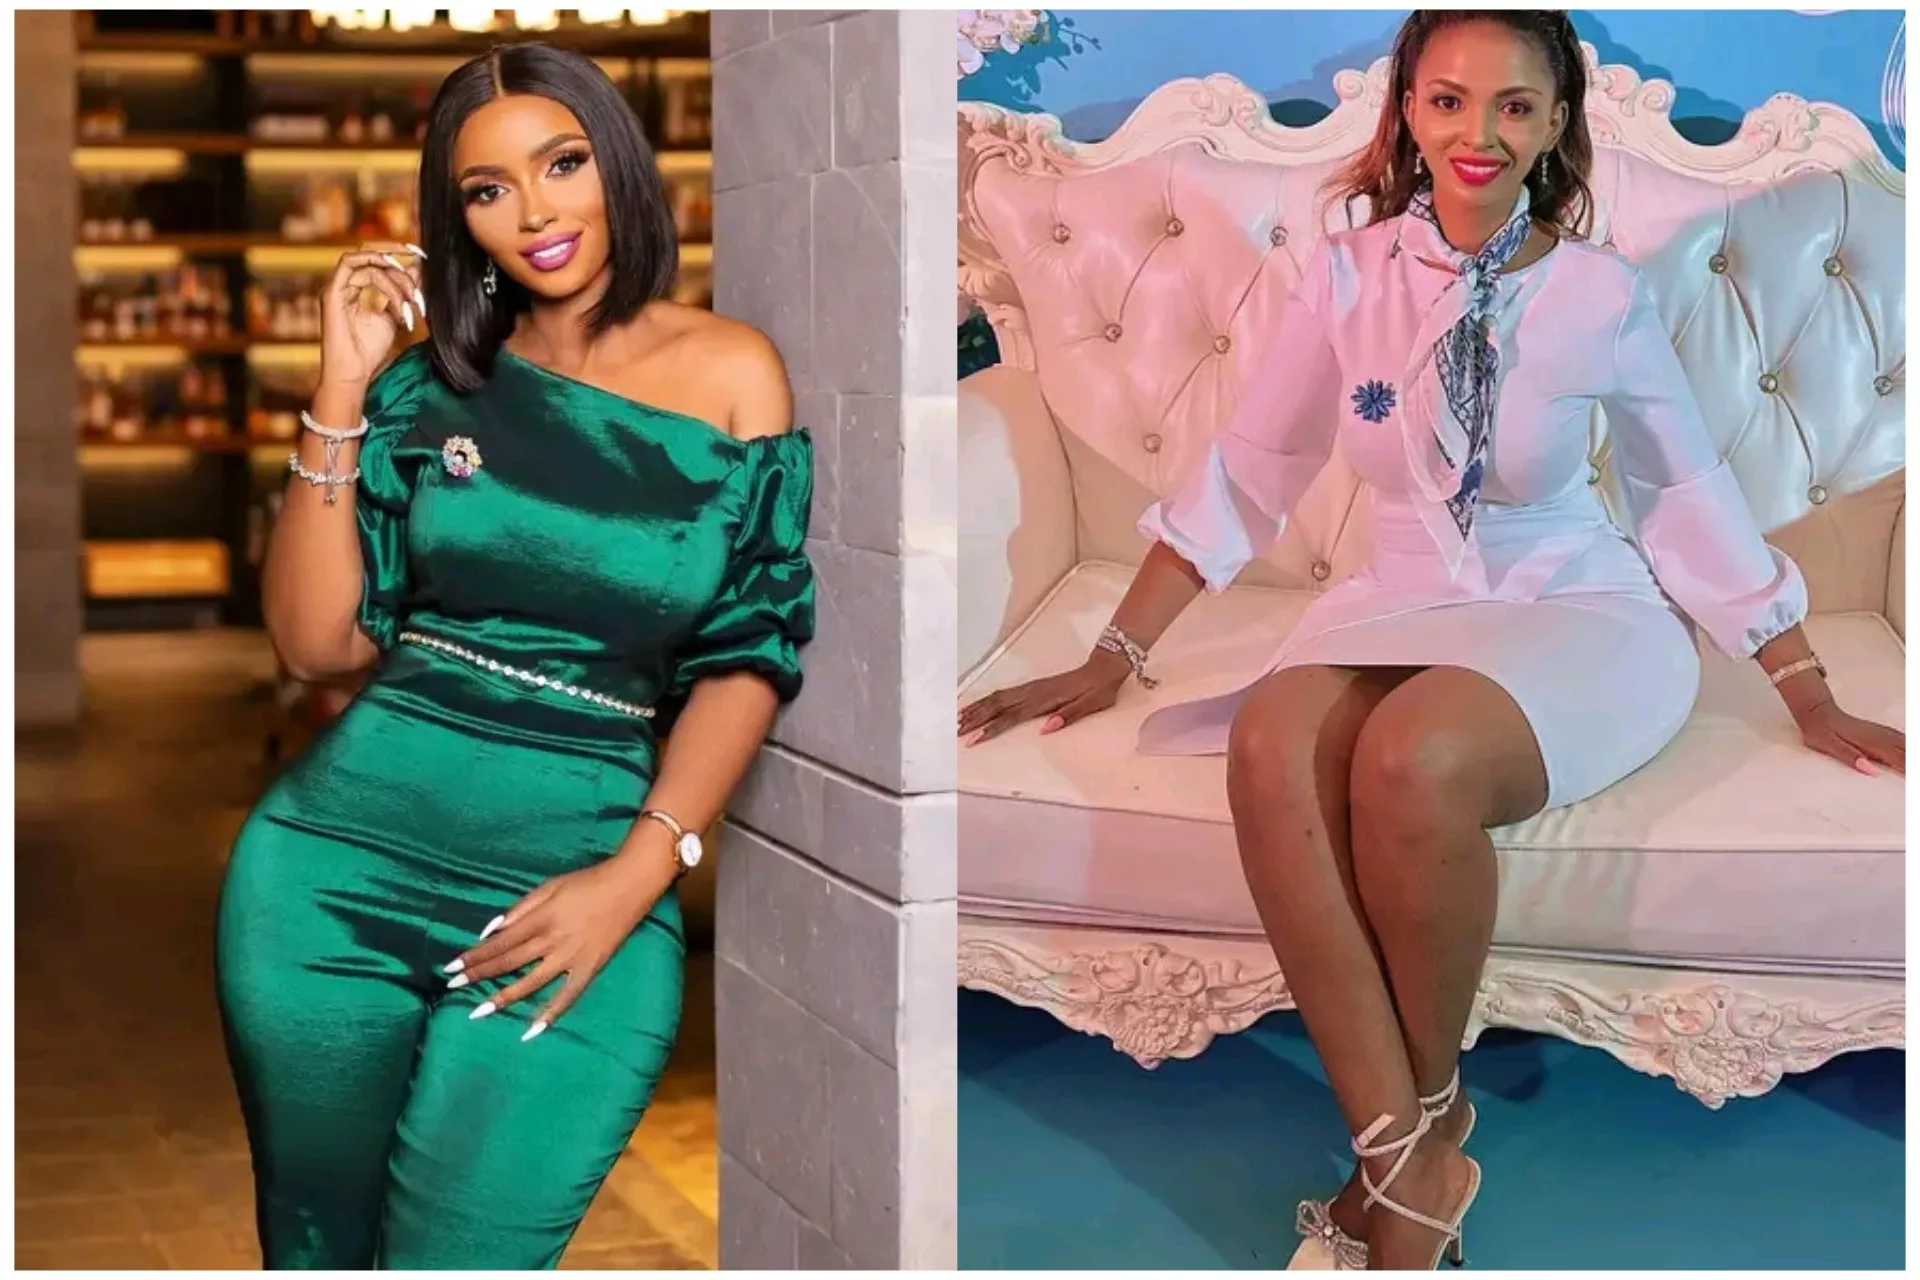 Social media influencer and Keroche breweries heiress Anerlisa Muiga has caused a stir on social media after revealing that she has been celibate for the last 7 months. Anerlisa revealed this through social media after uploading a video of a lady describing how much her life has changed since she decided to go celibate. According to the Nero Company Limited CEO, restraining her honeypot from men for 7 months is one of the best decision she has ever made. The keroche breweries heiress shared a video of a lady describing how much her life has changed since she decided to go celibate. The lady in the video said that since she decided to go celibate, her standards changed, her confidence level rose, and even the kind of people she was attracted to in the past changed. She also added that her feminine hygiene improved so much. Reacting to the video, Anerlisa said her experience after deciding to practice celibacy is similar to that of the lady in the video. " Seven months with no sex and still going strong. I feel better and I view everything differently now. Everything you said is exactly what I experience." The social media influencer is not new in relationships. She first dated Ian Mugoya who is a former Straight Up host. Her relationship did not last long. After Mugoya, she went on to date Stephen Kungu. The Kenyan entrepreneur also dated Tanzanian musician Ben Pol. The entrepreneur has been rumoured to be seeing a guy called Melvin Ibrahim since her split from Tanzanian singer Ben Pol.